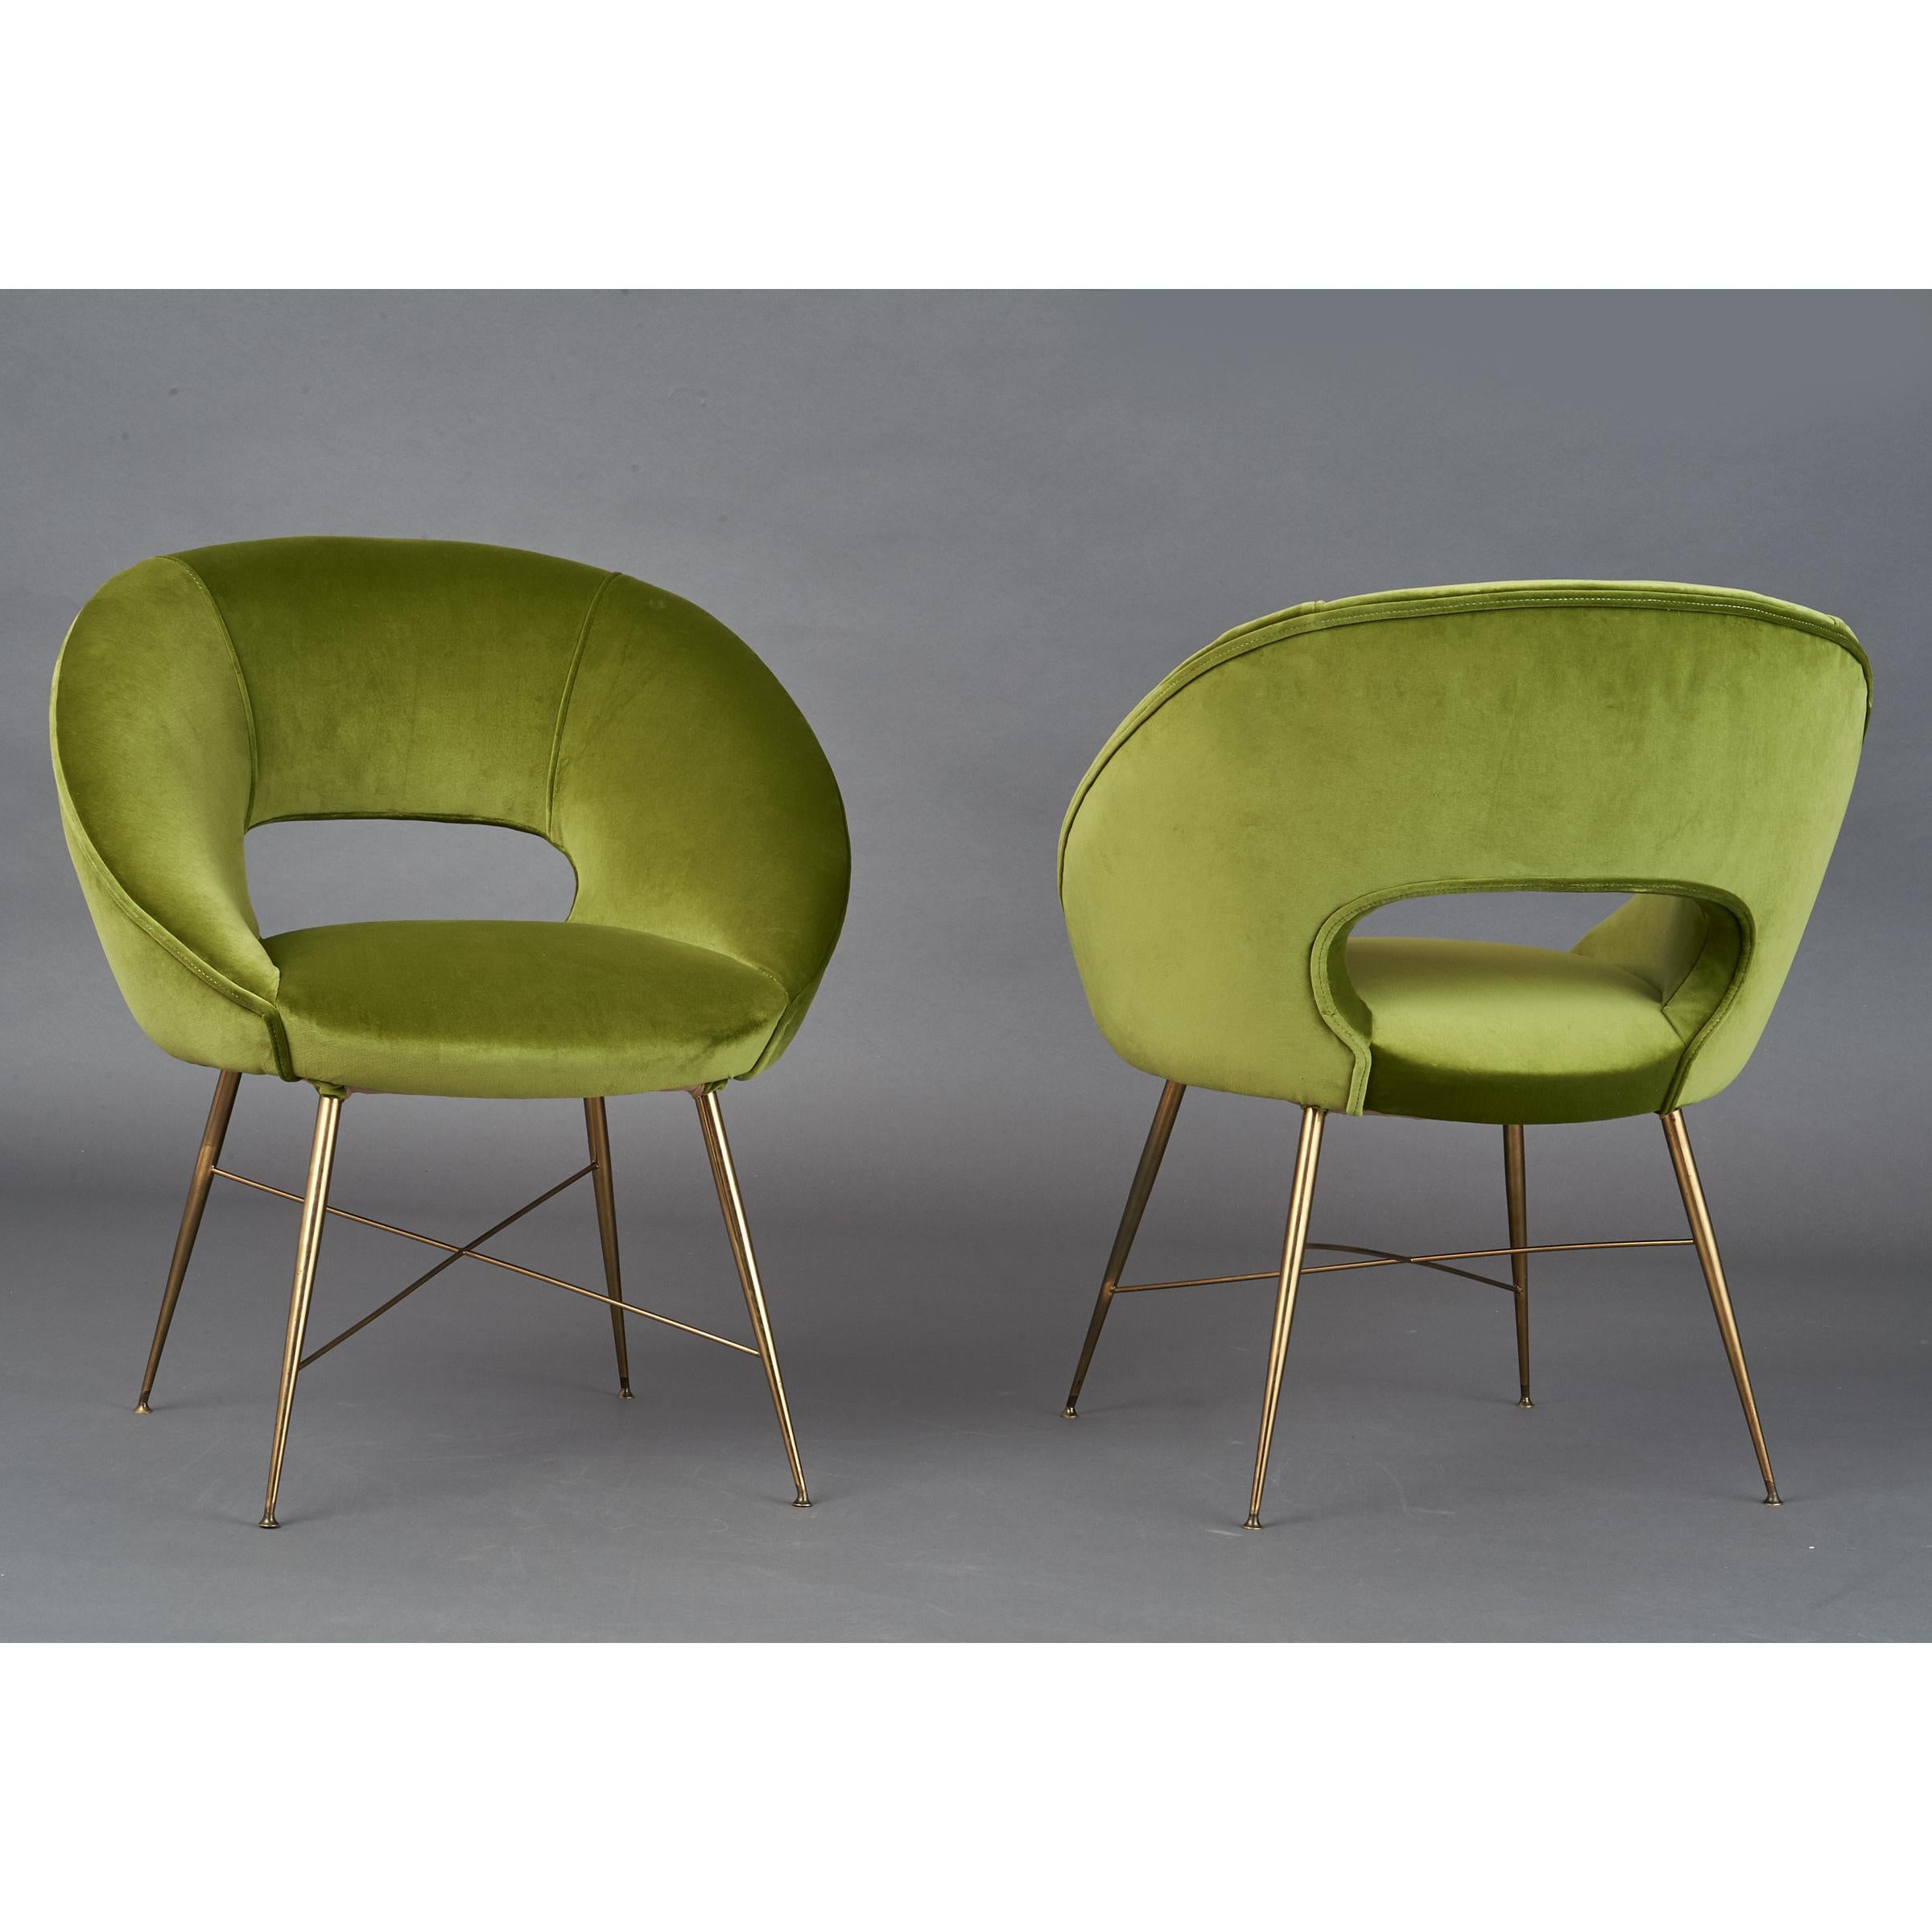 Italy, 1950s
A light and lively pair of egg shaped Modernist armchairs with cut out in back, tapering brass legs and cross stretchers.
26 W x 24 D x 29 / 16 H
Newly upholstered.